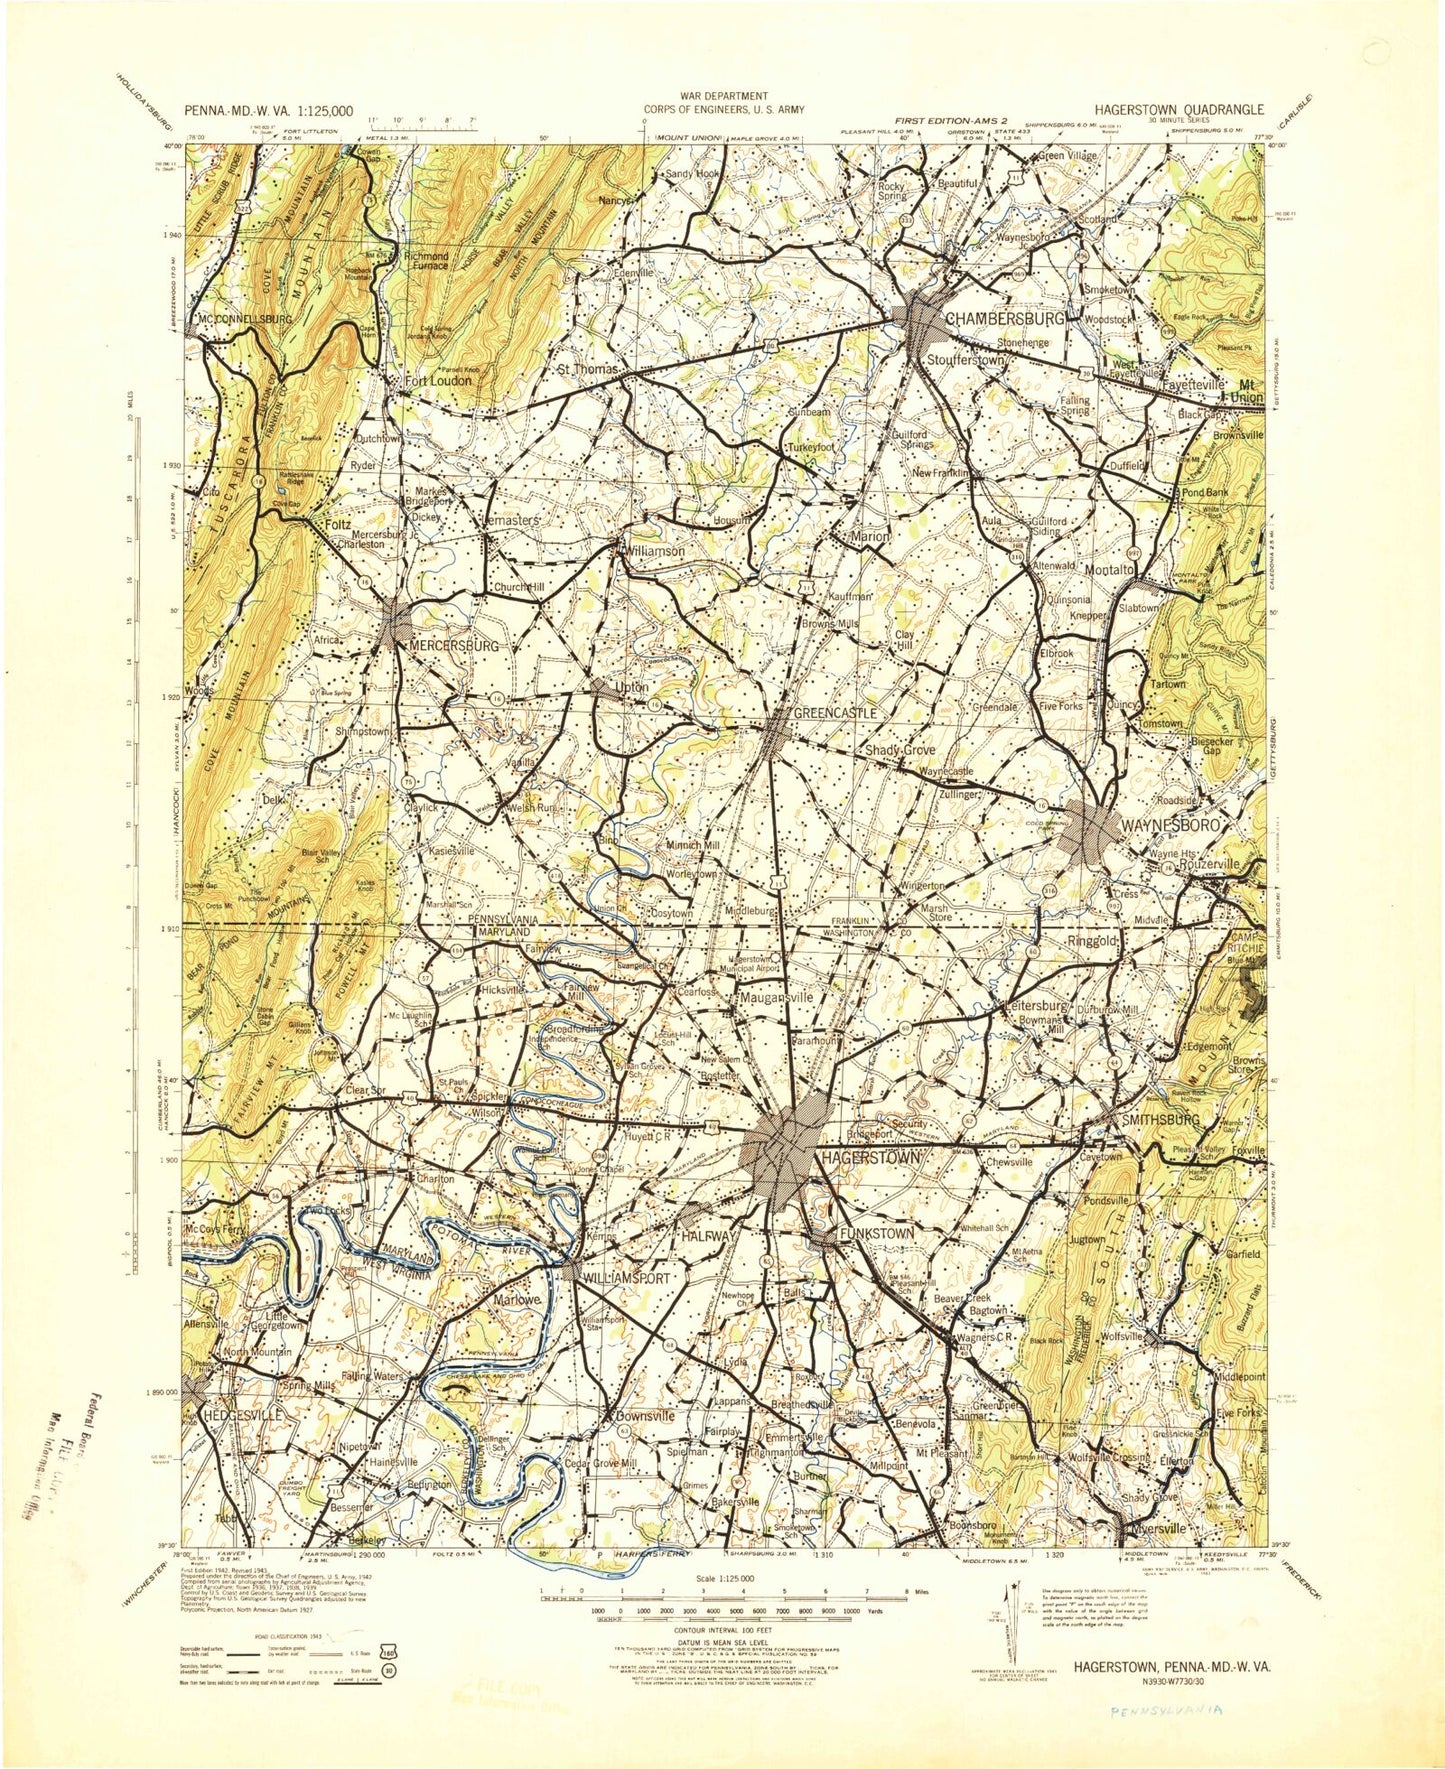 Historic 1943 Hagerstown Maryland 30'x30' Topo Map Image